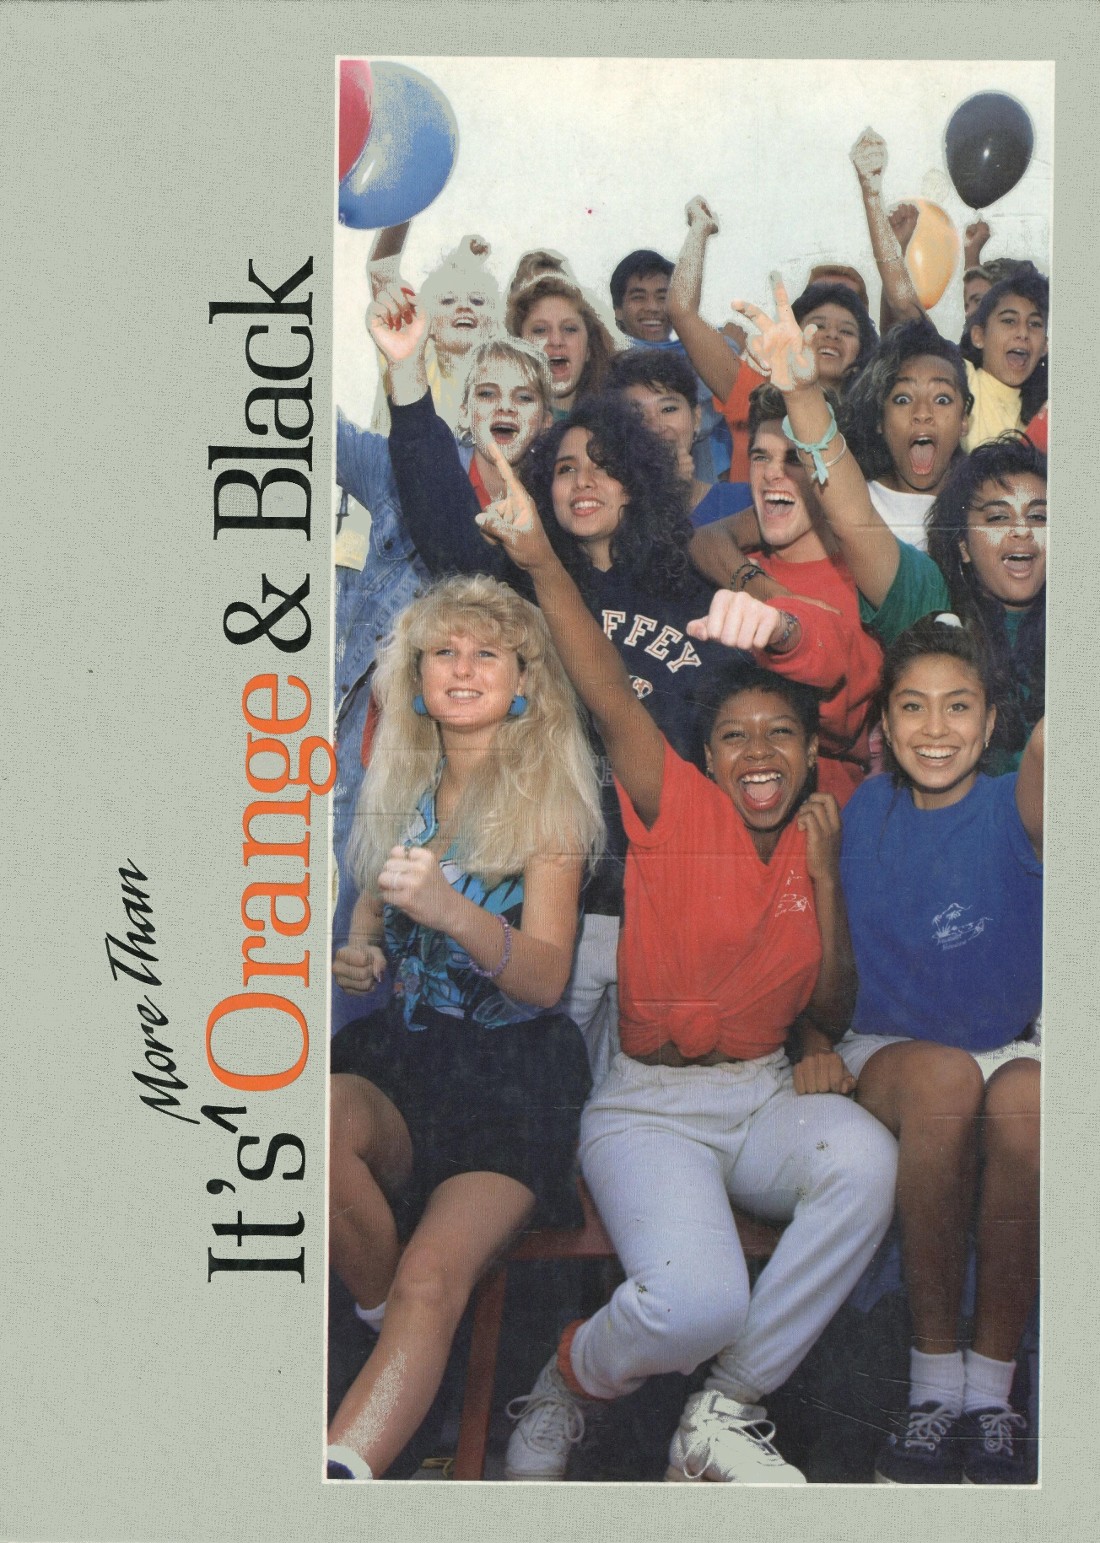 1988 yearbook from Chaffey High School from Ontario, California for sale